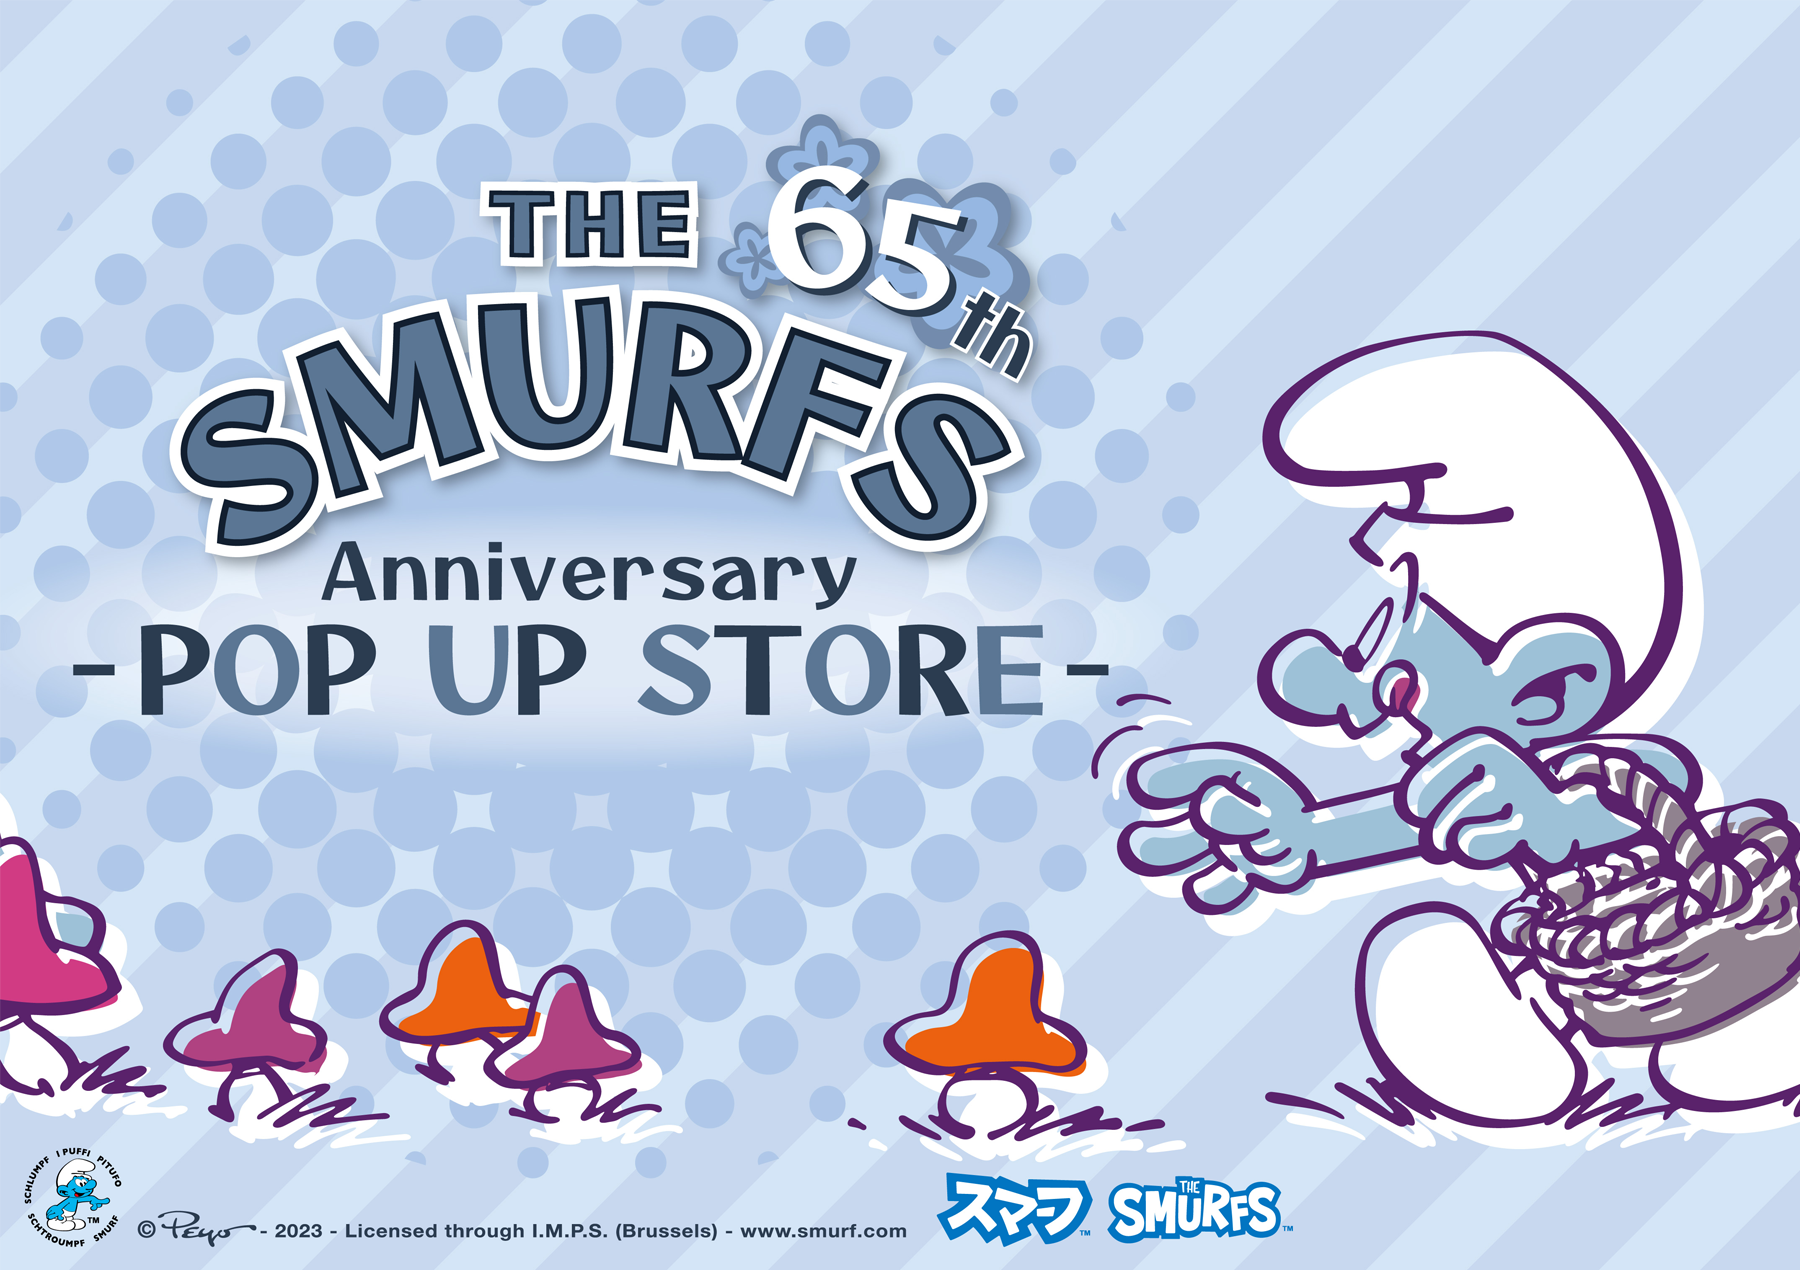 The SMURFS: 65th anniversary pop-up stores are open!